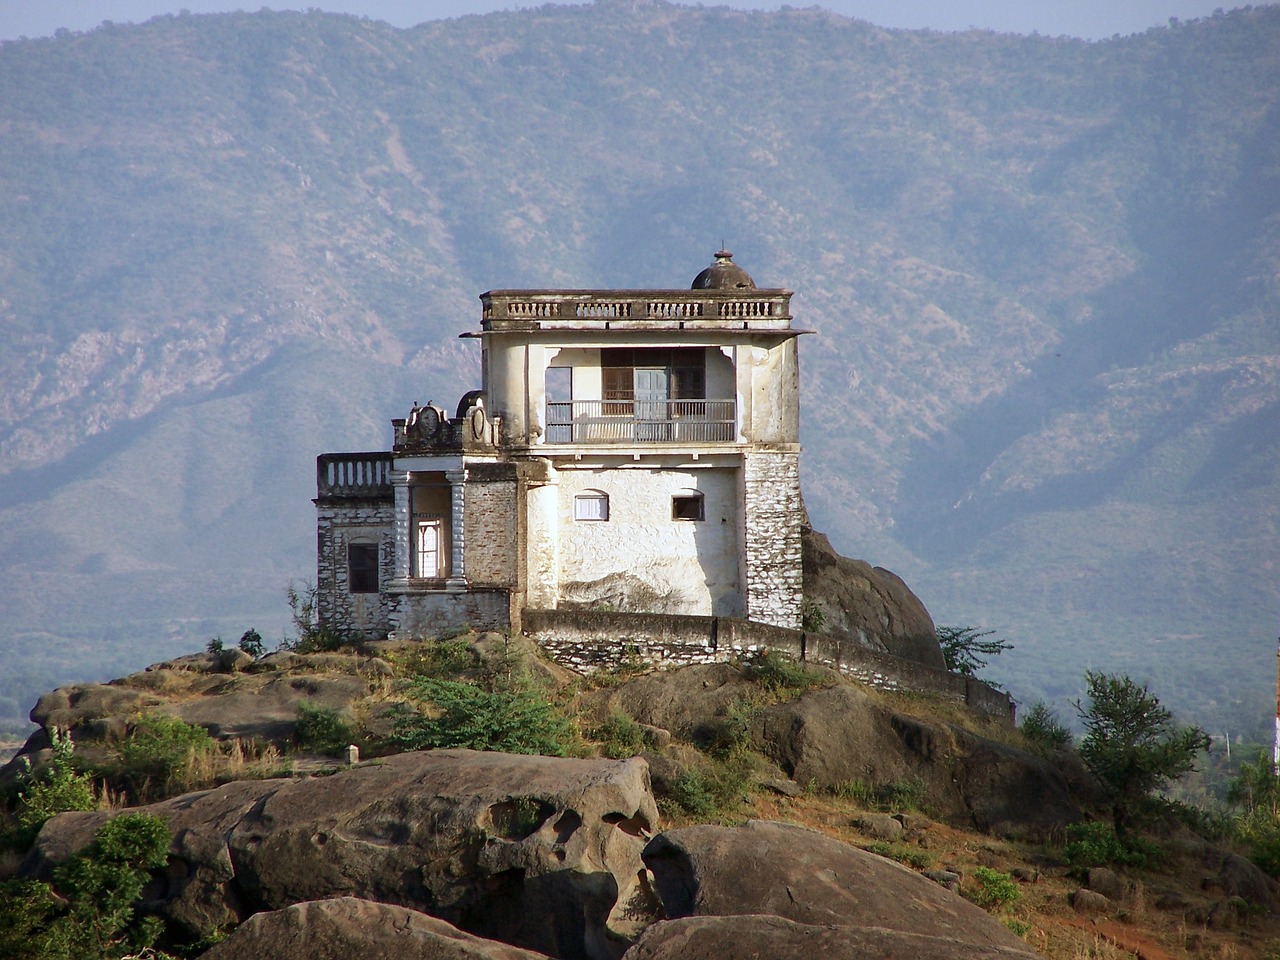 Tranquil Retreat in Mount Abu with a Taste of Local Flavors